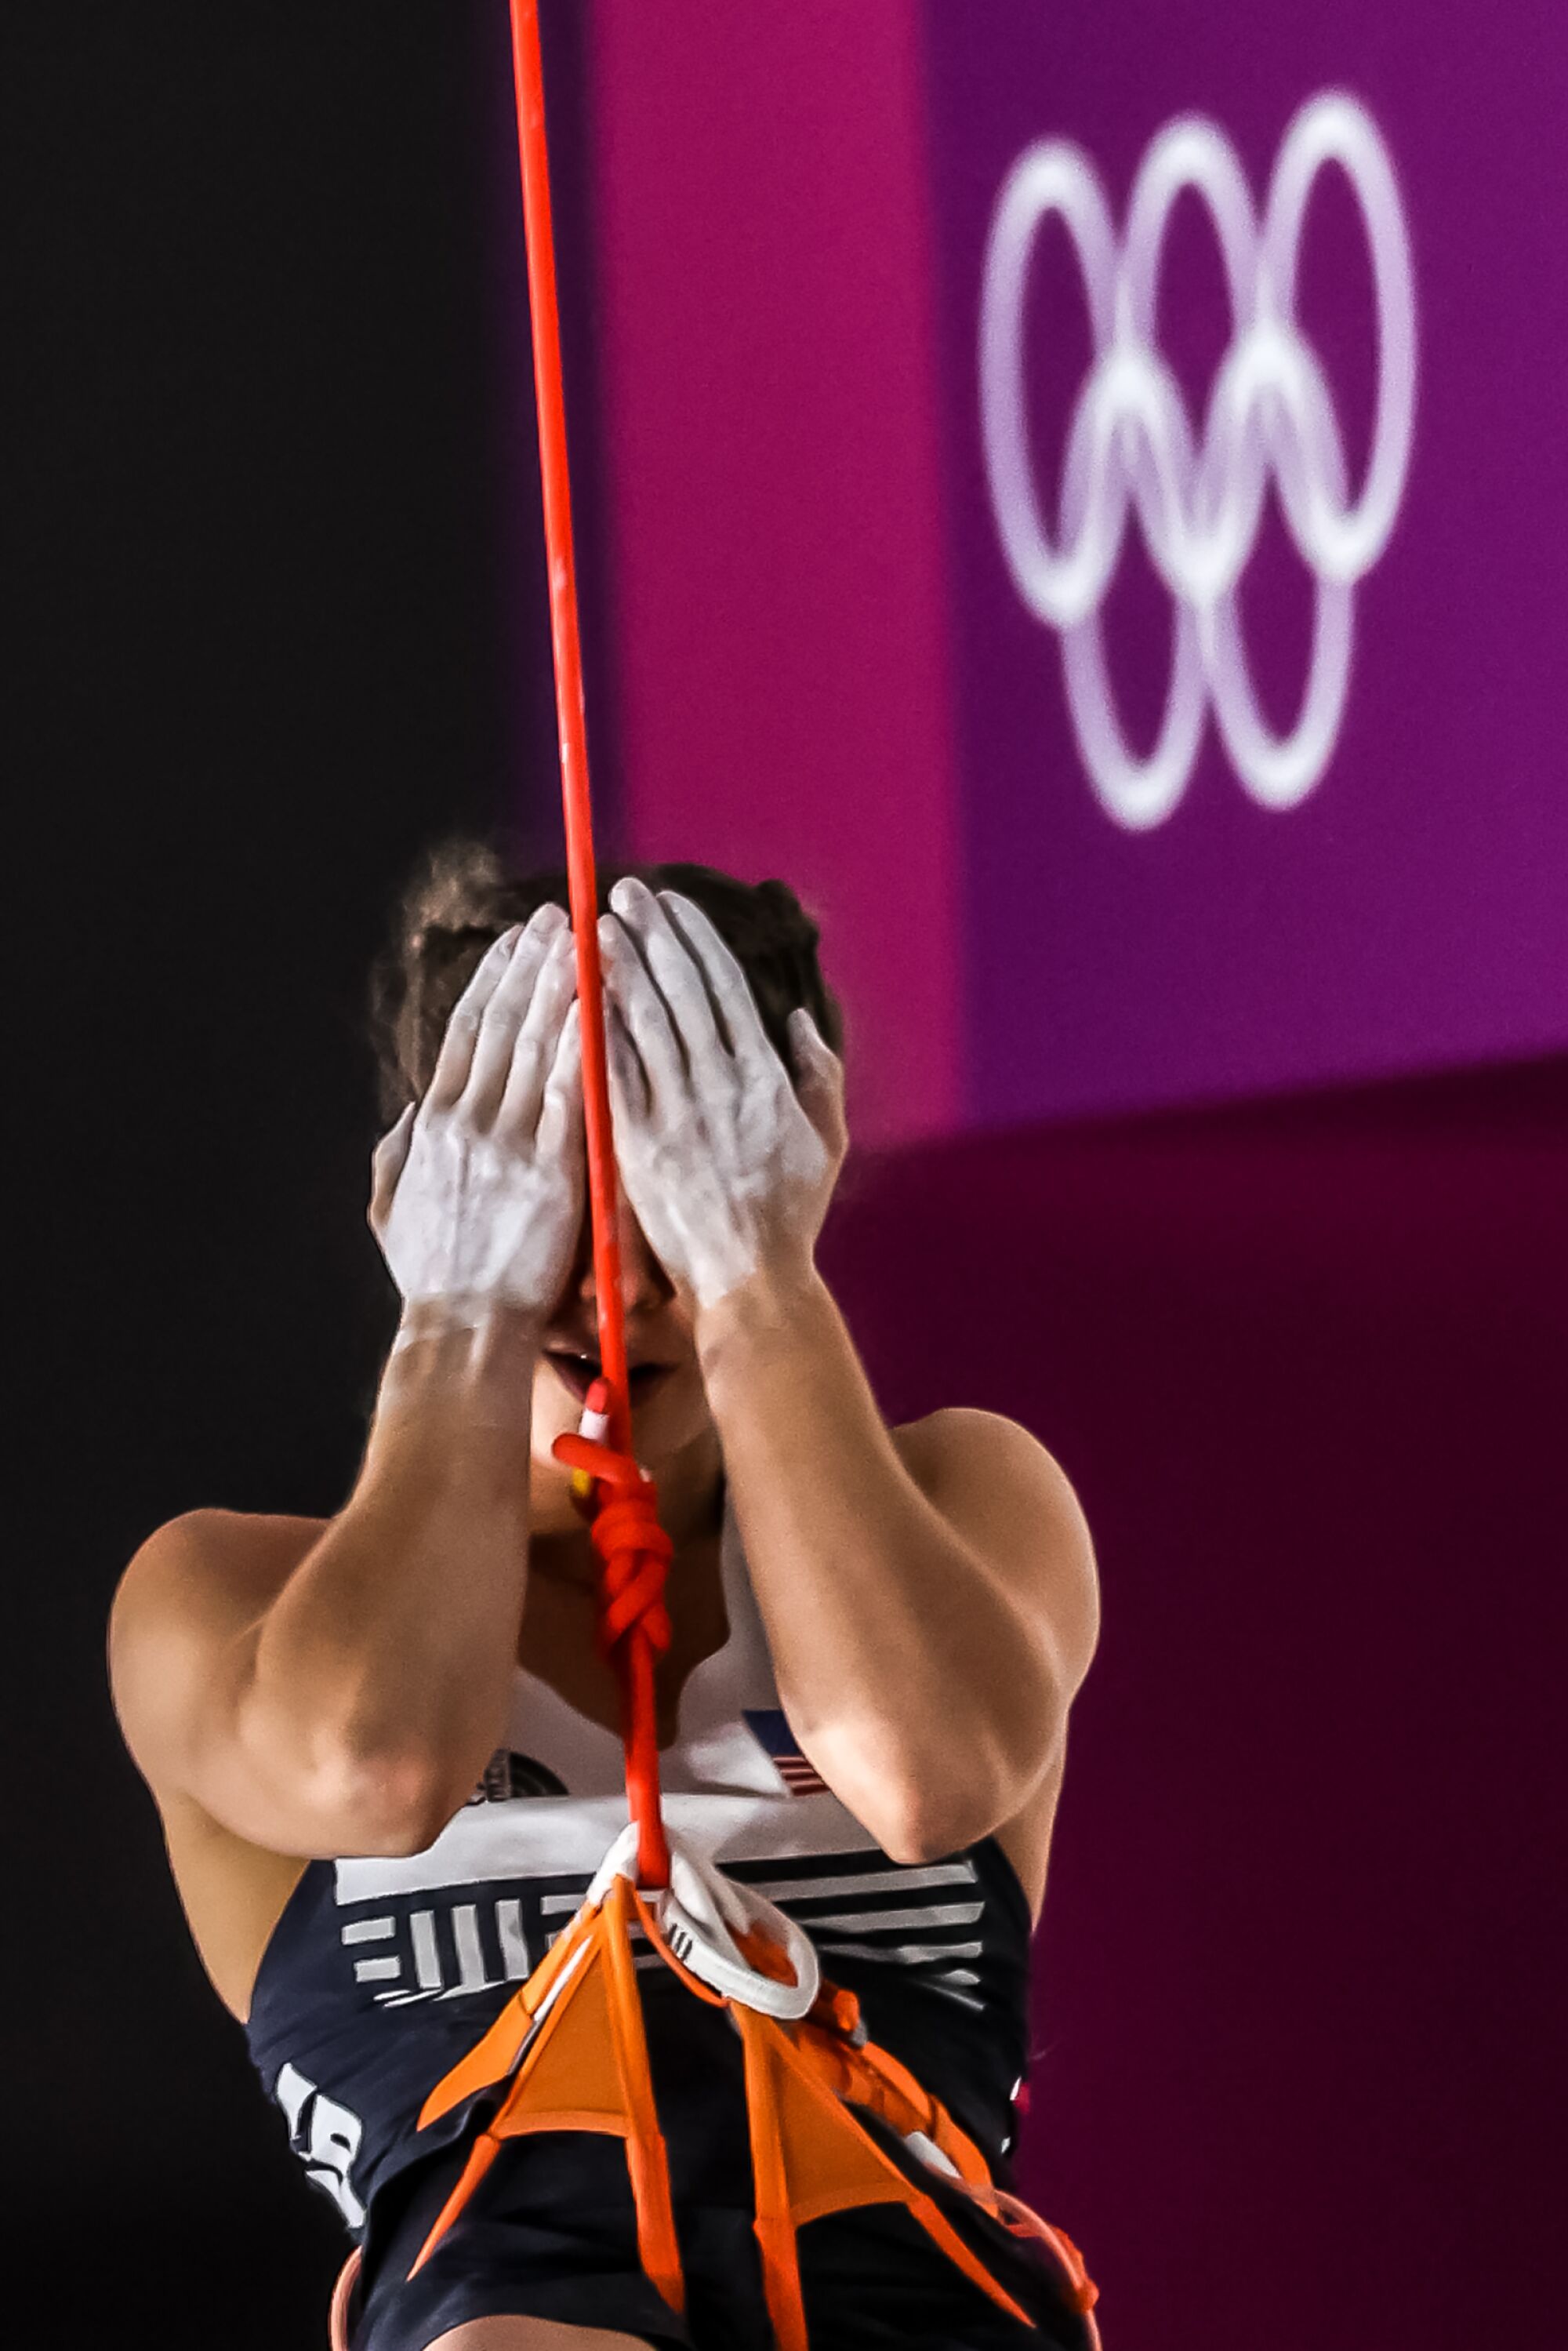 Brooke Raboutou shows disappointment as she descends from the wall following the women's combined sport climbing final.